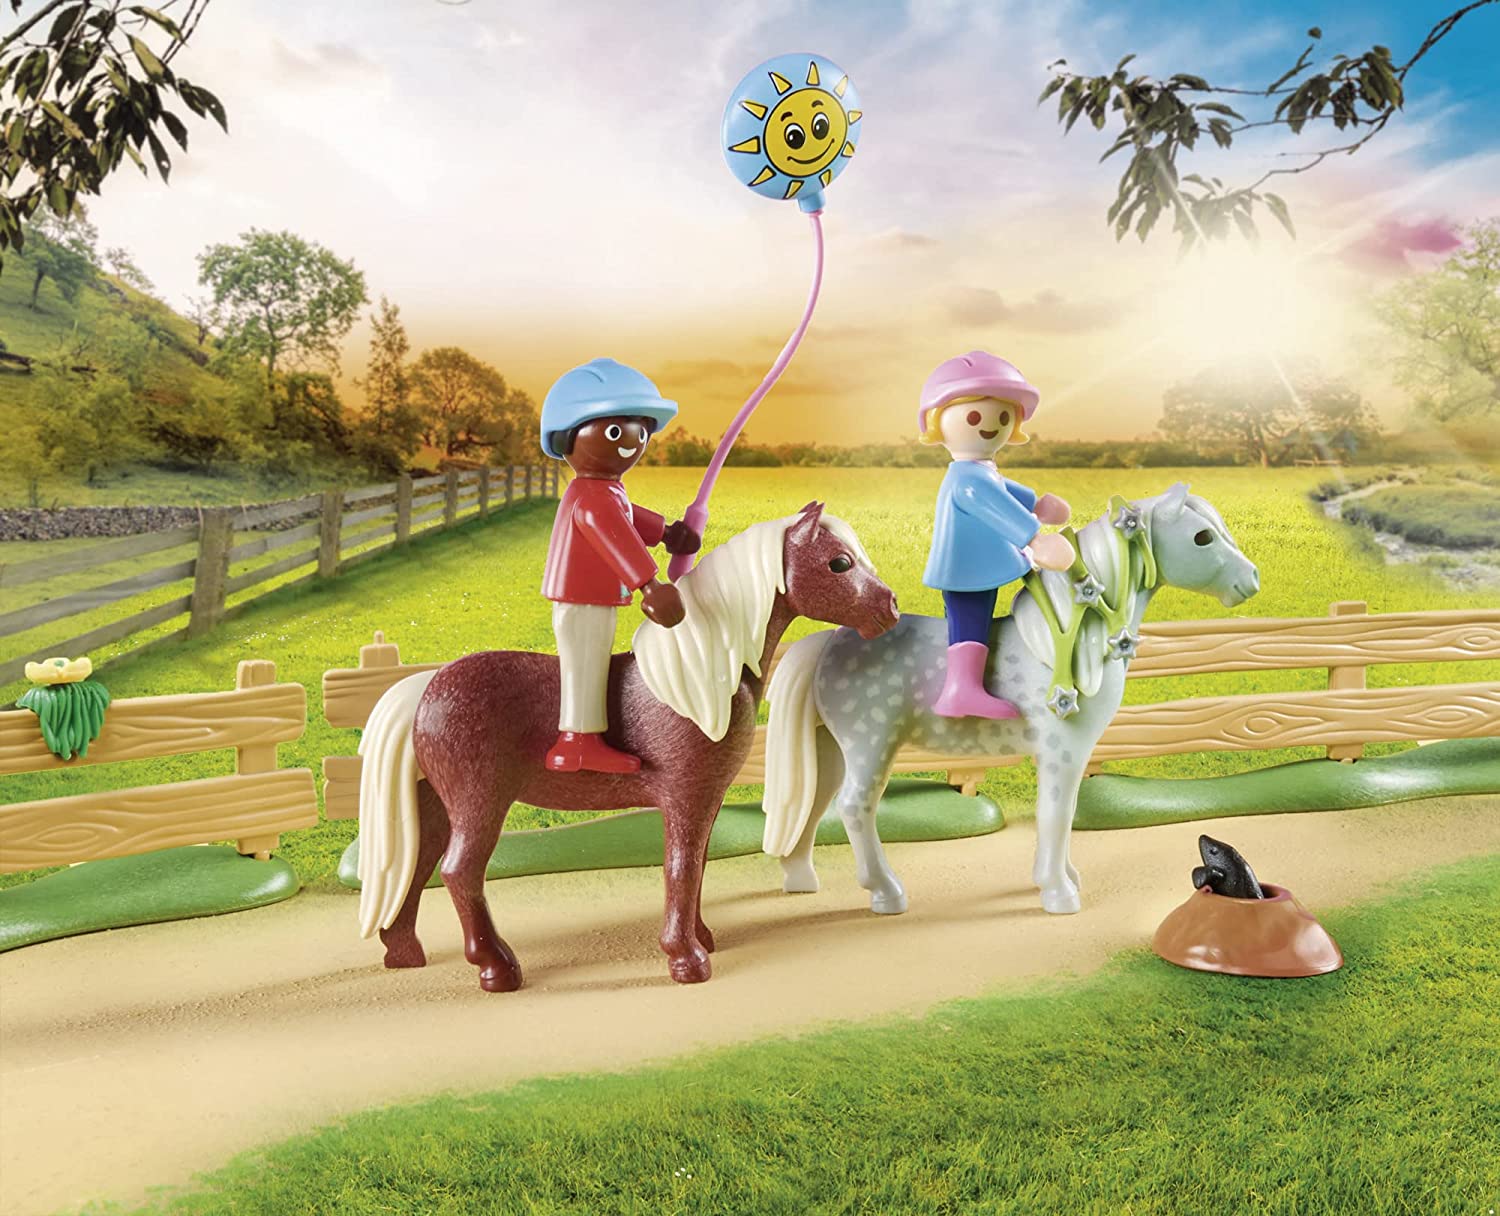 Playmobil 70996 Country Pony Farm Horse Riding Tournament, Horse Toys, Fun  Imaginative Role-Play, PlaySets Suitable for Children Ages 4+